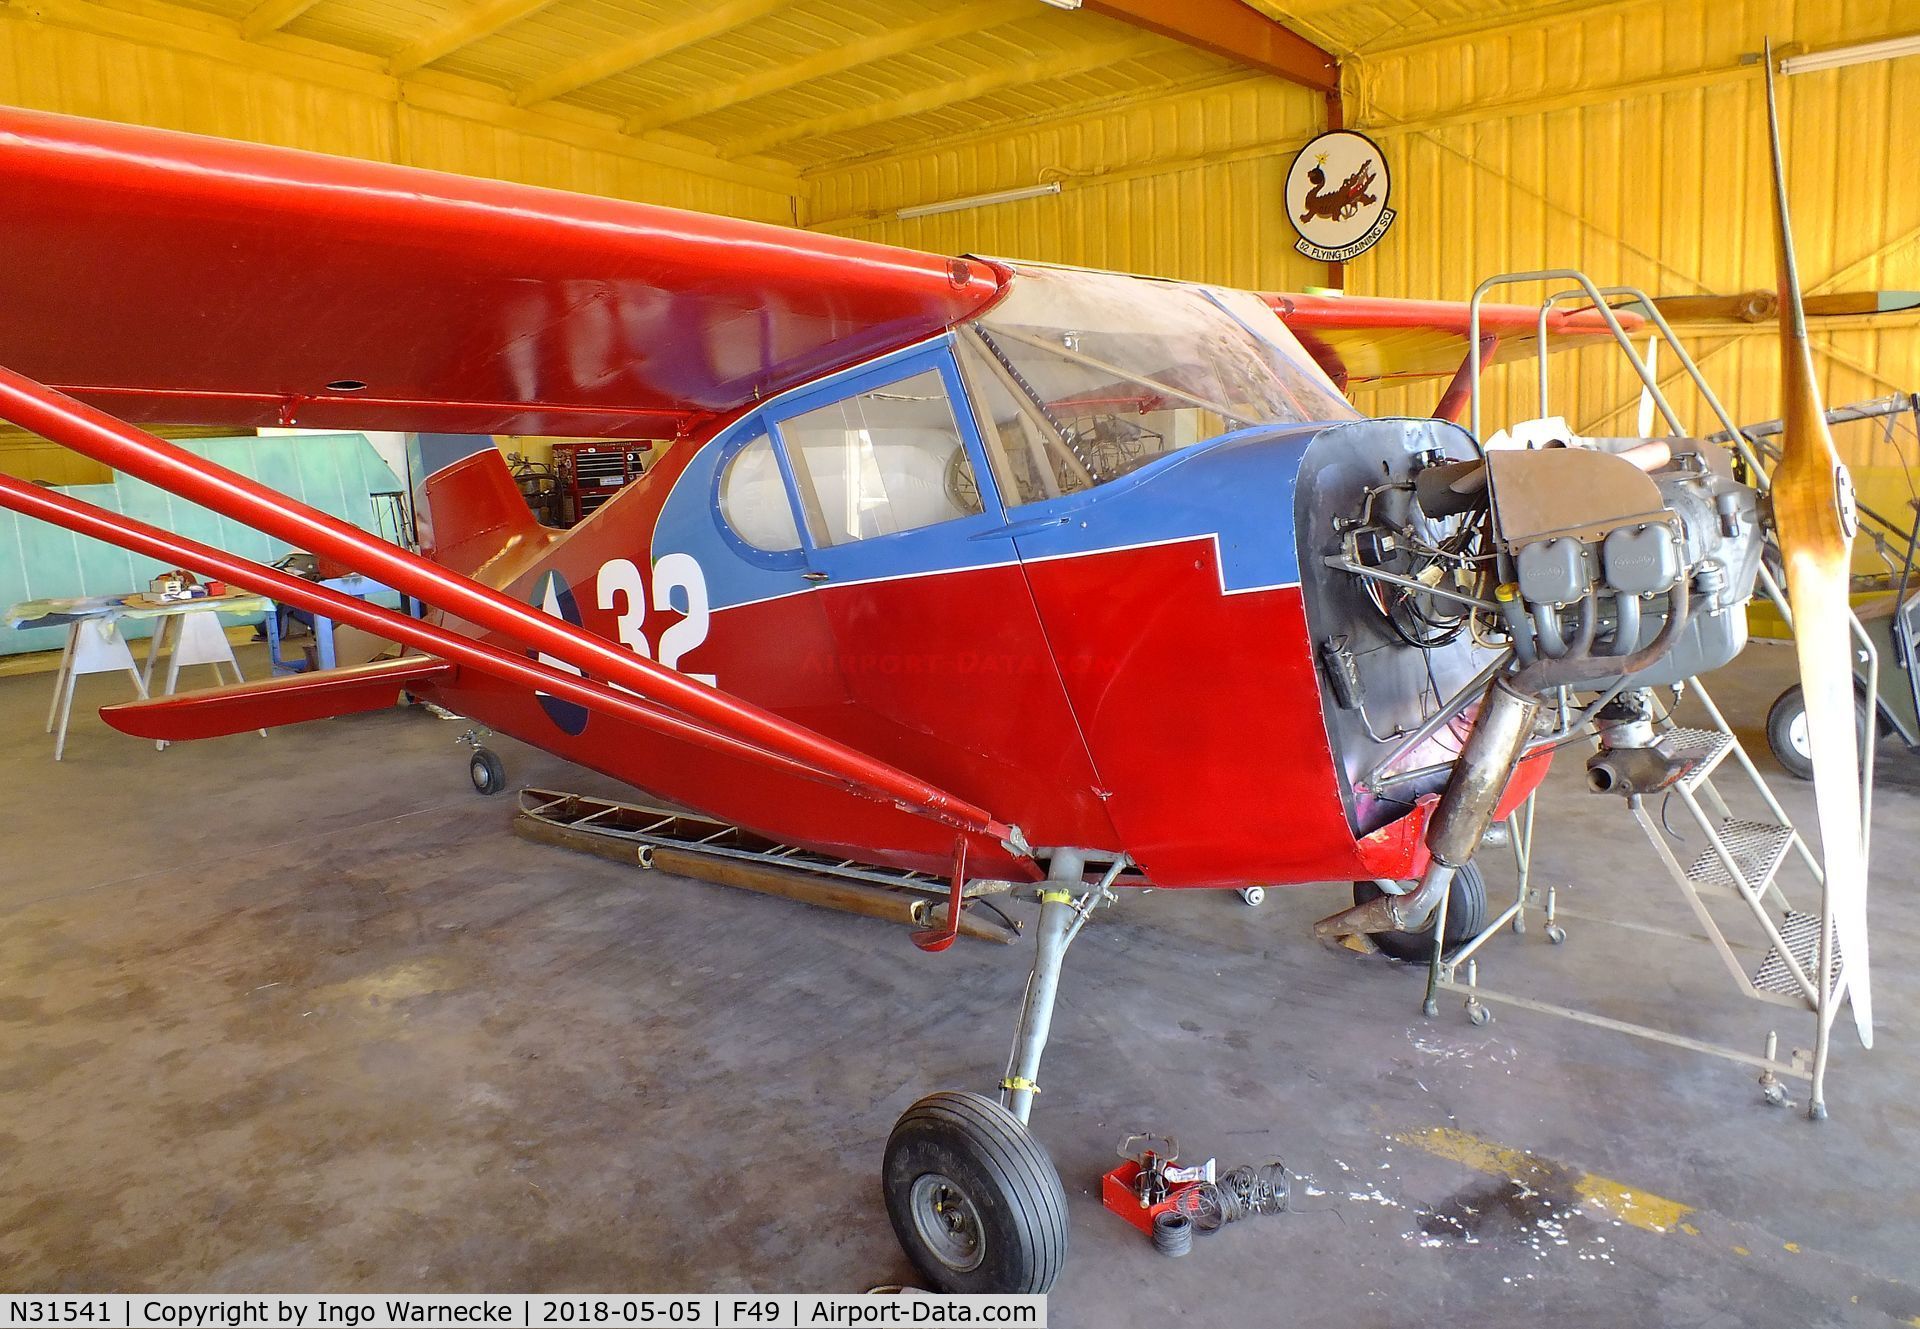 N31541, 1941 Stinson 10A C/N 7790, Stinson 10A Voyager at the Texas Air Museum Caprock Chapter, Slaton TX